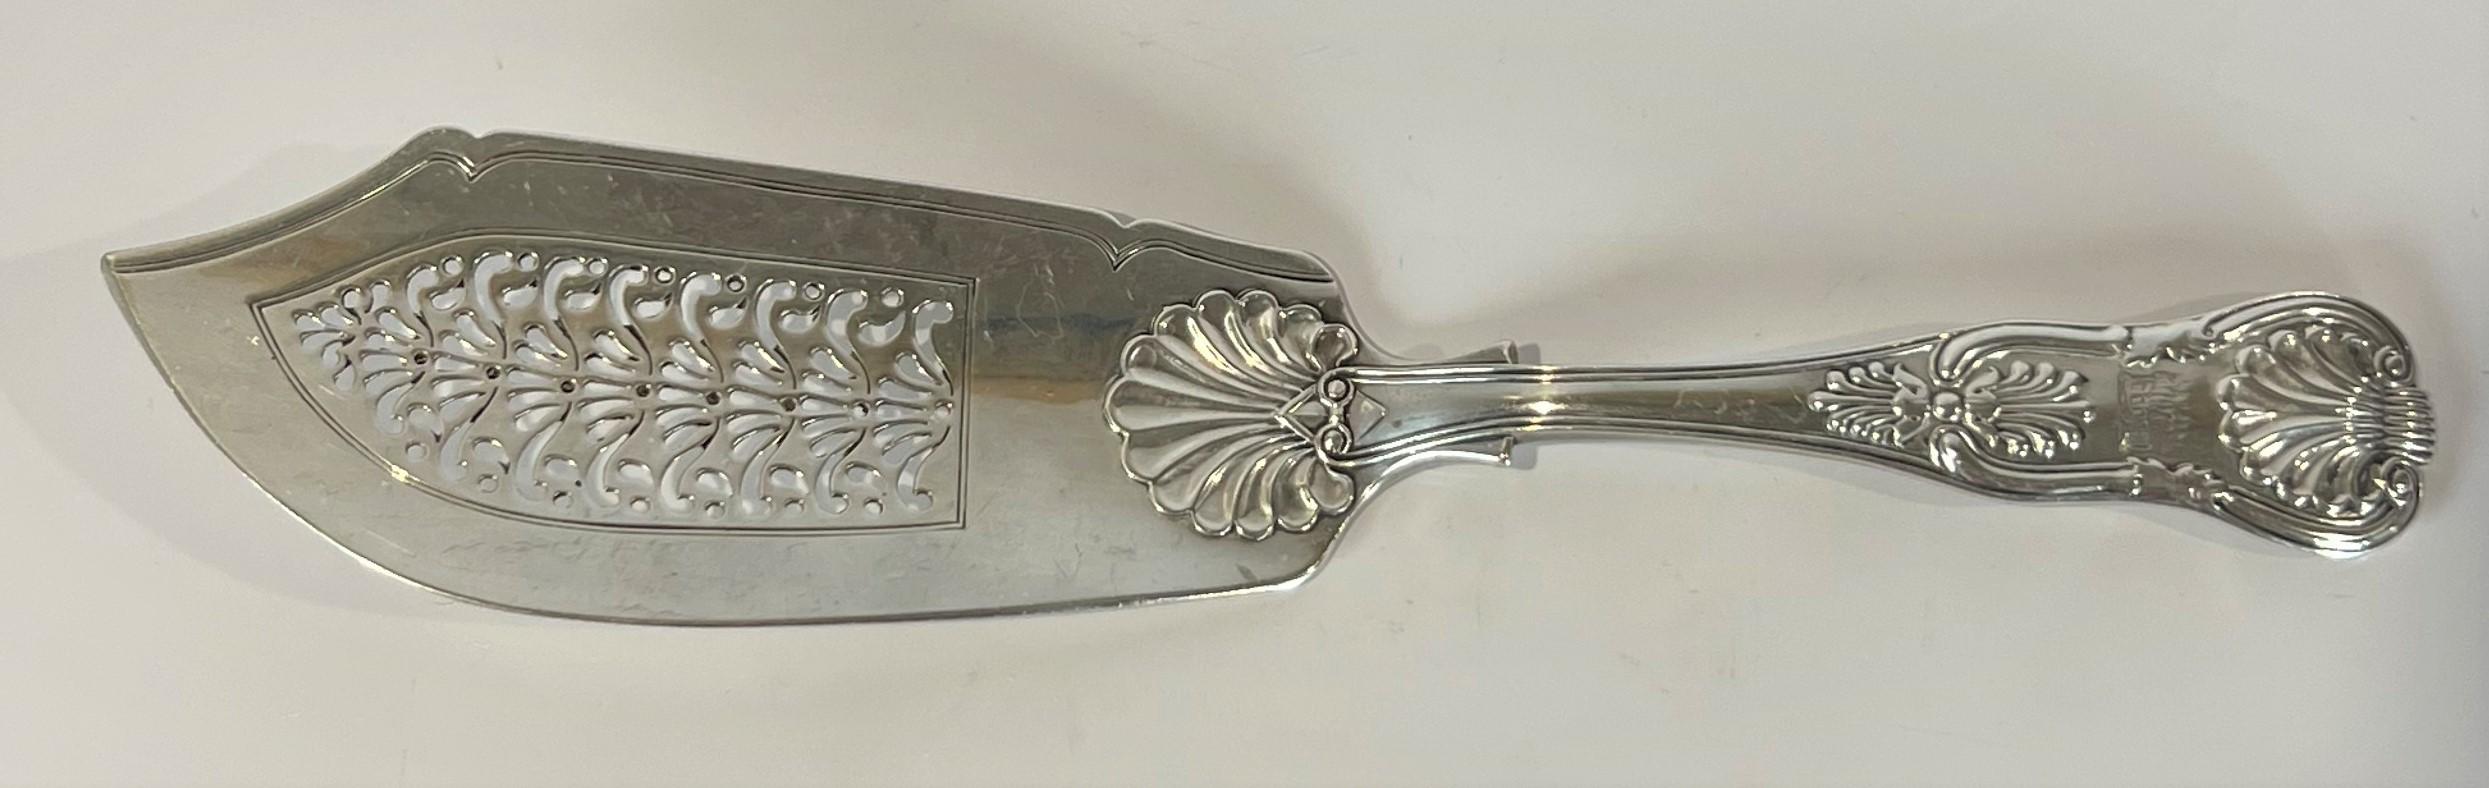 Early Victorian Fish Server William Bateman 1830 Sterling Silver monogram of burning building For Sale